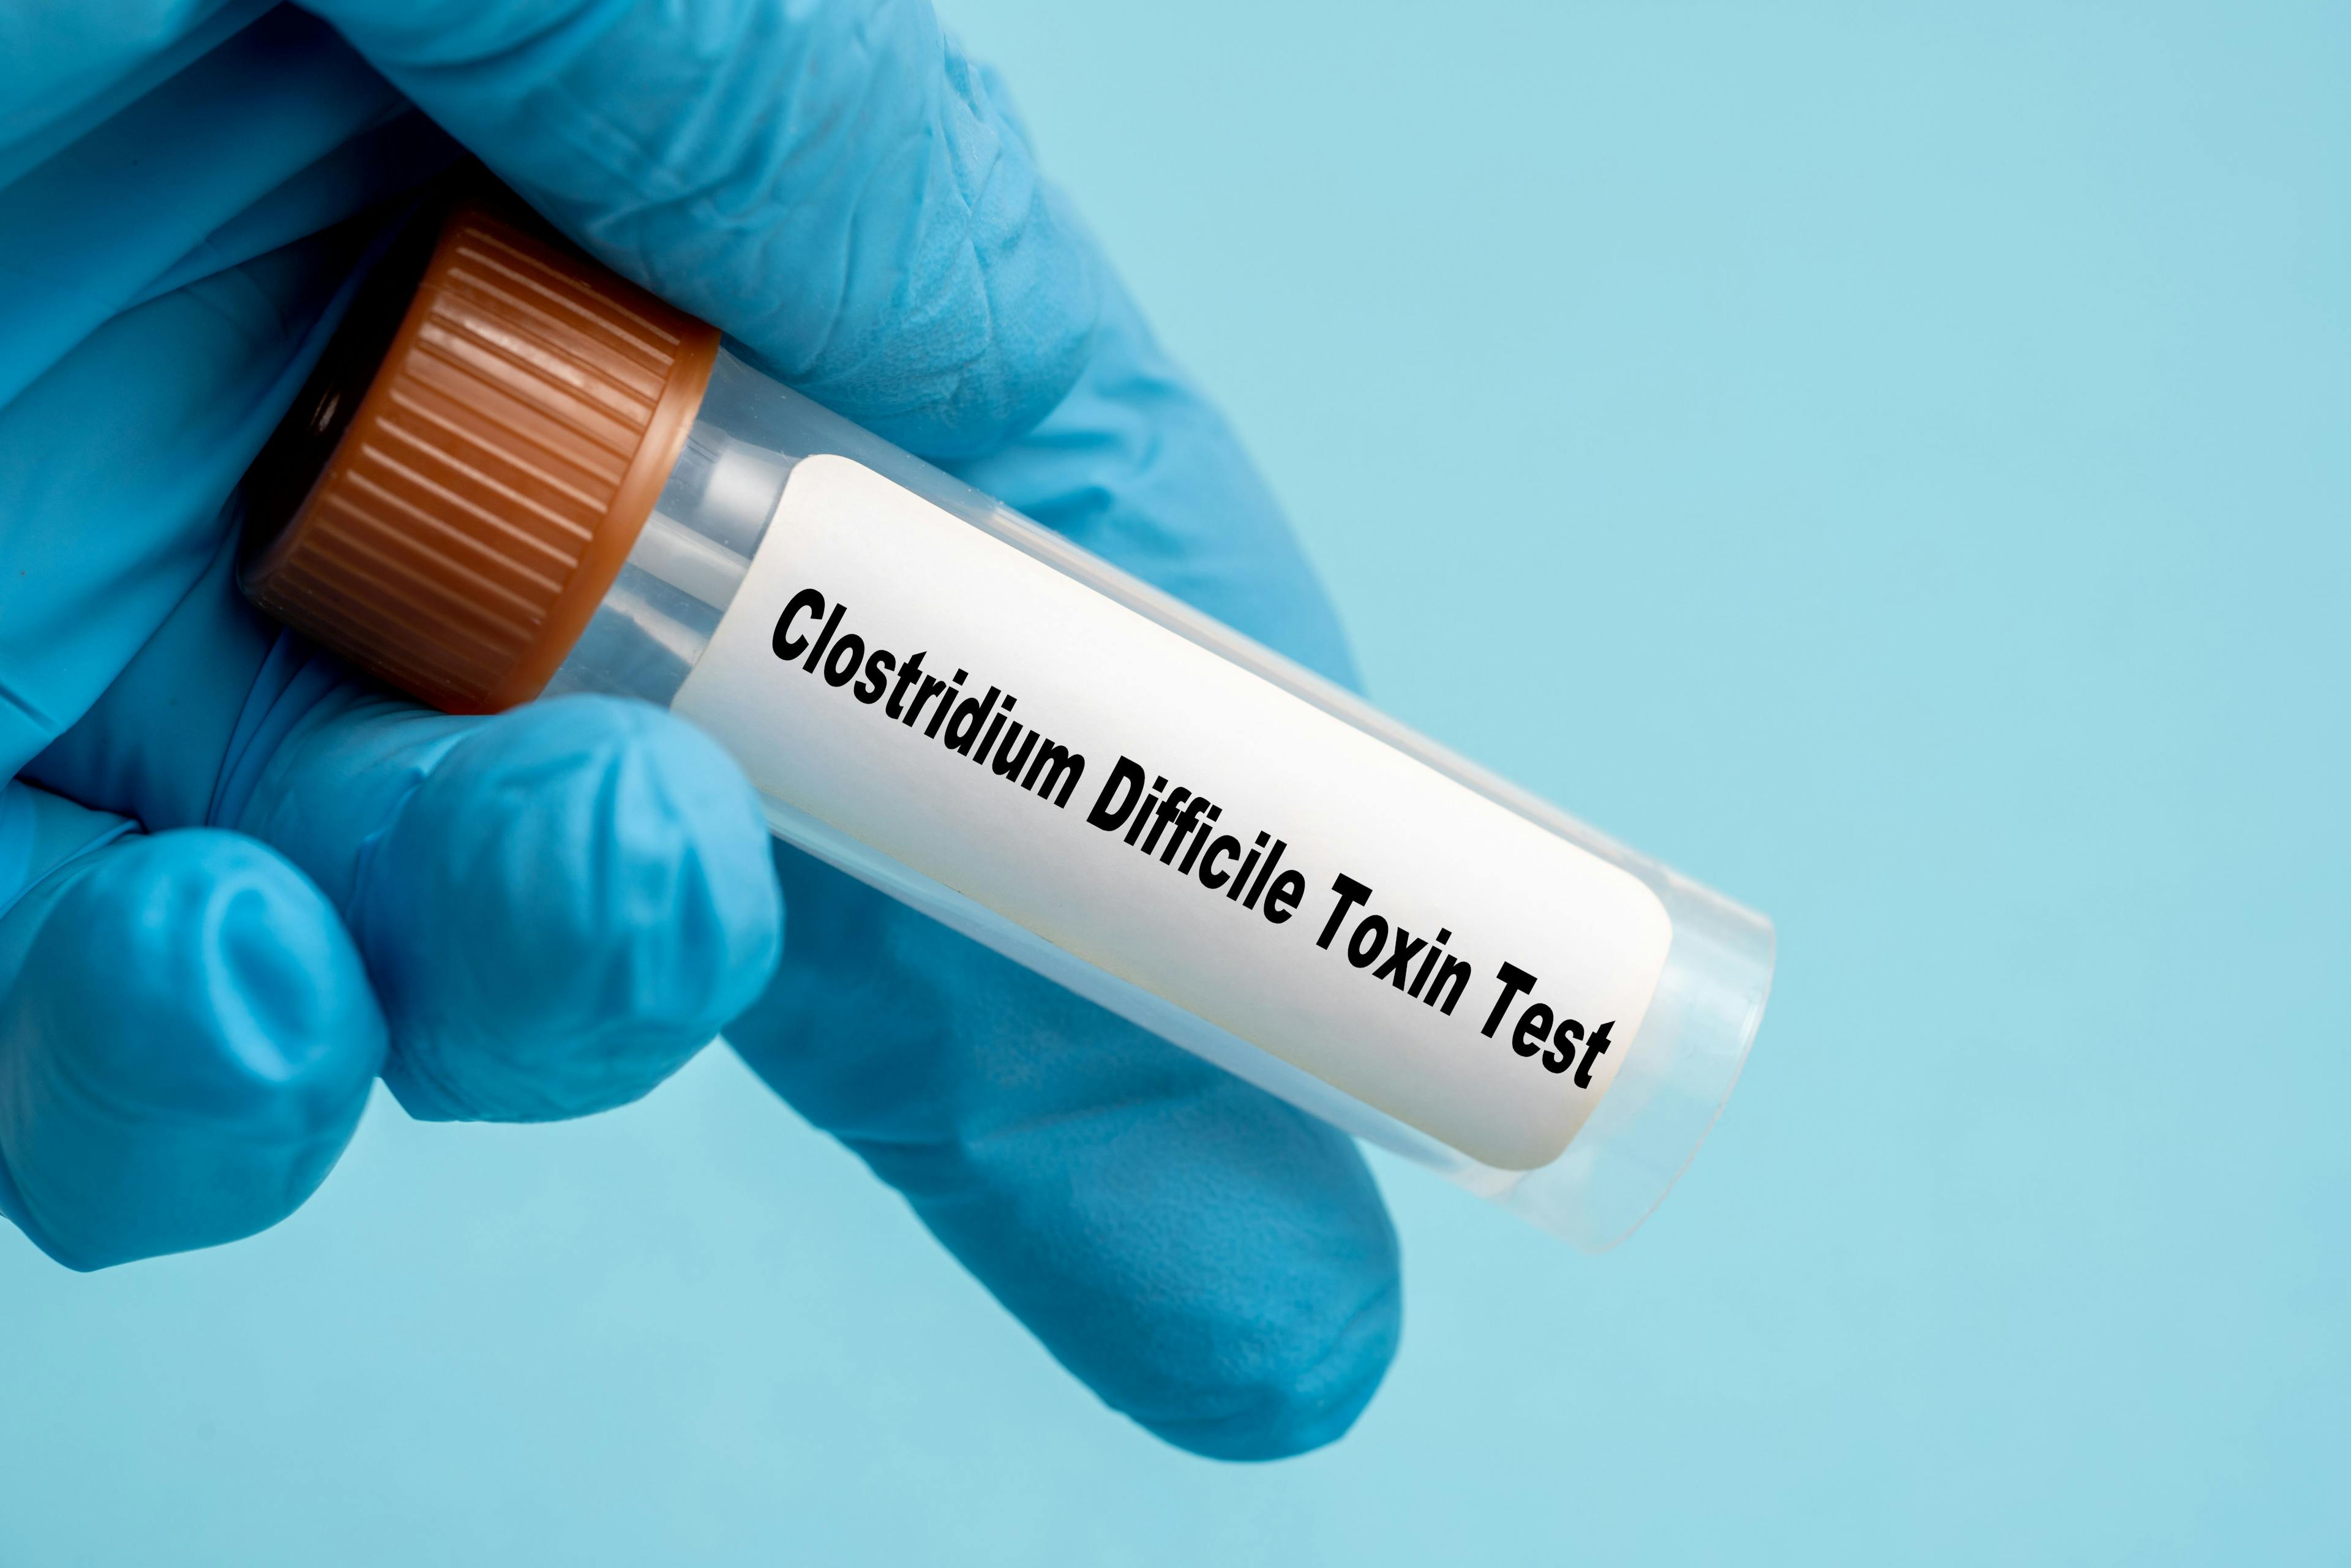 This study explores the effectiveness of PCR and toxin EIA testing in predicting C difficile infection (CDI) outcomes. The research reveals that patients with negative toxin results were less likely to experience CDI recurrence within 30 days.